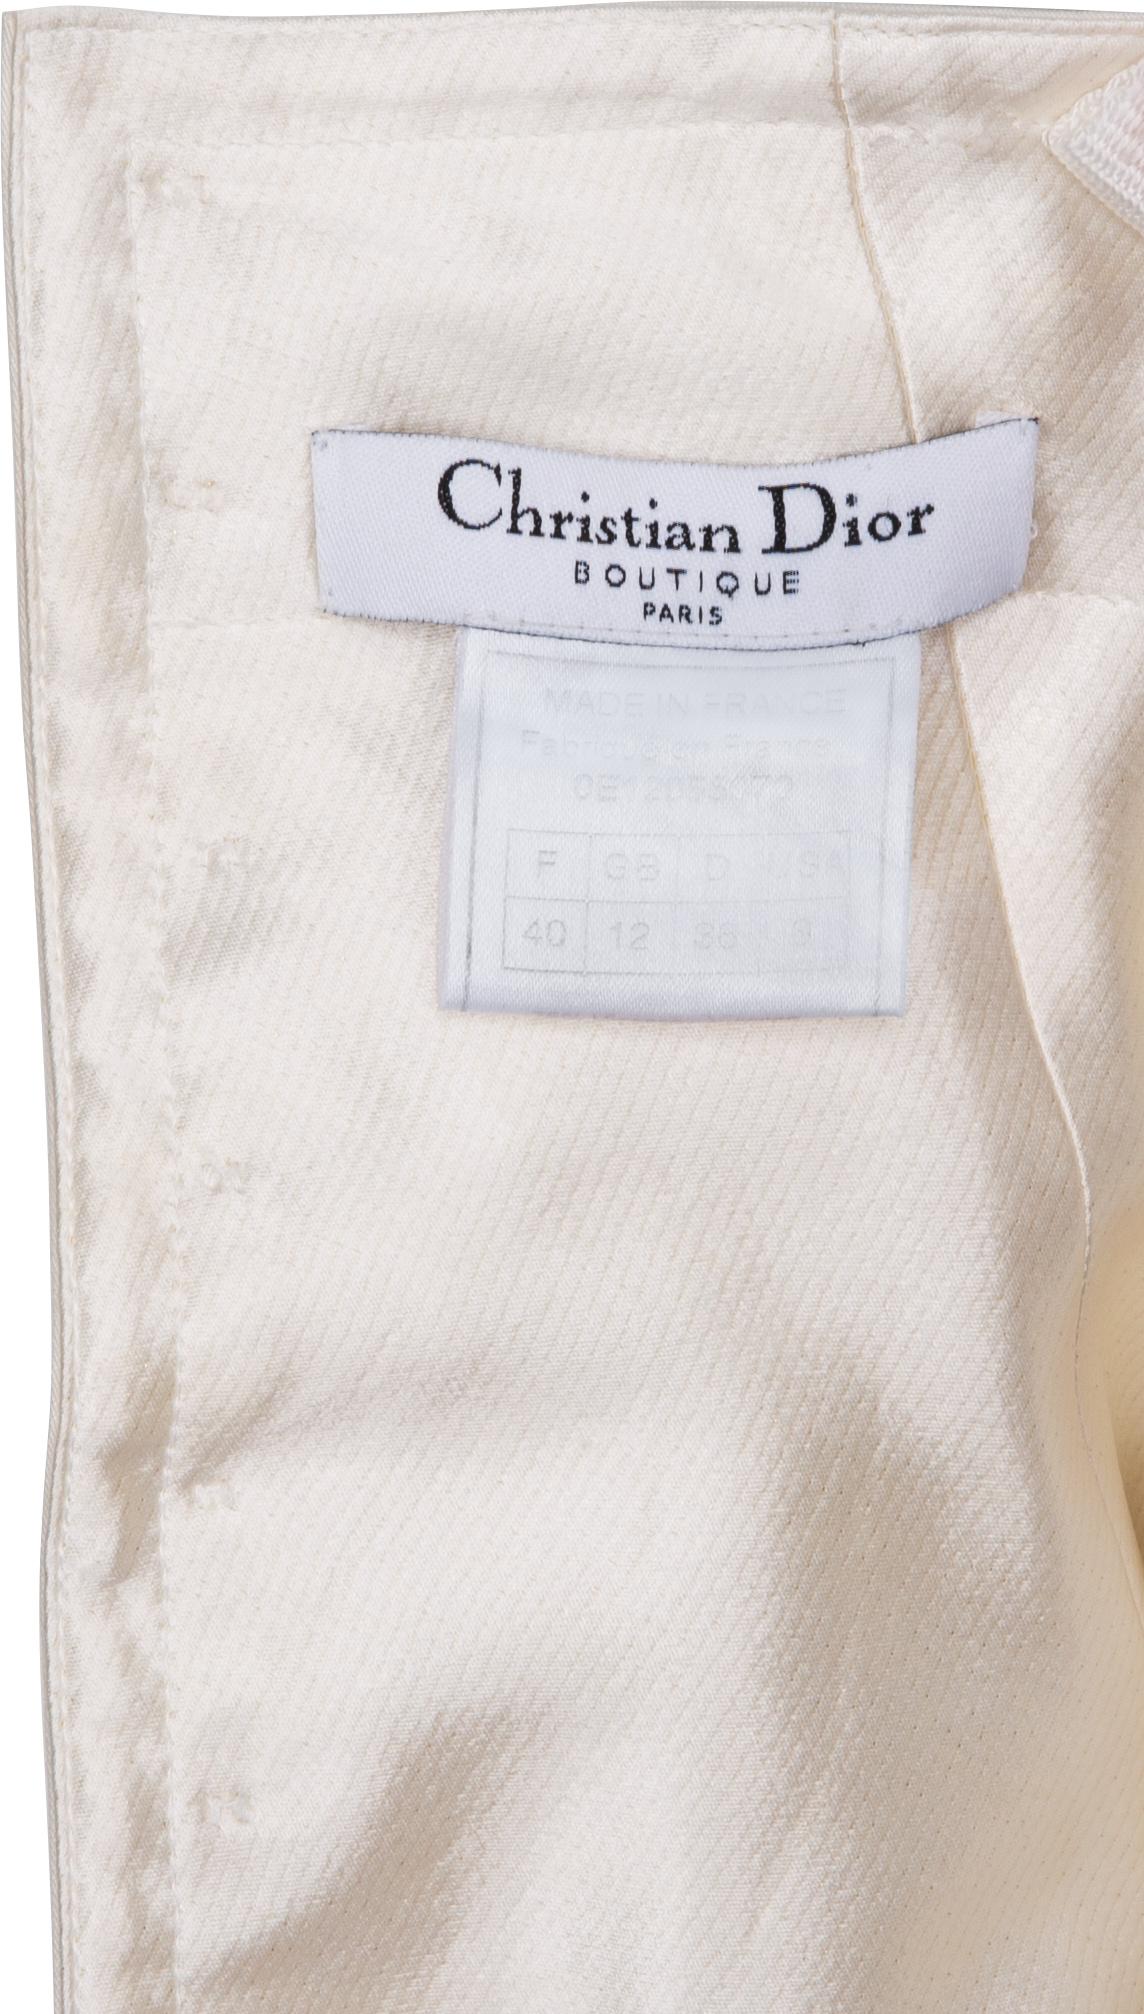 Christian Dior Spring 2000 Runway Deconstructed Asymmetrical Top In Excellent Condition For Sale In San Diego, CA